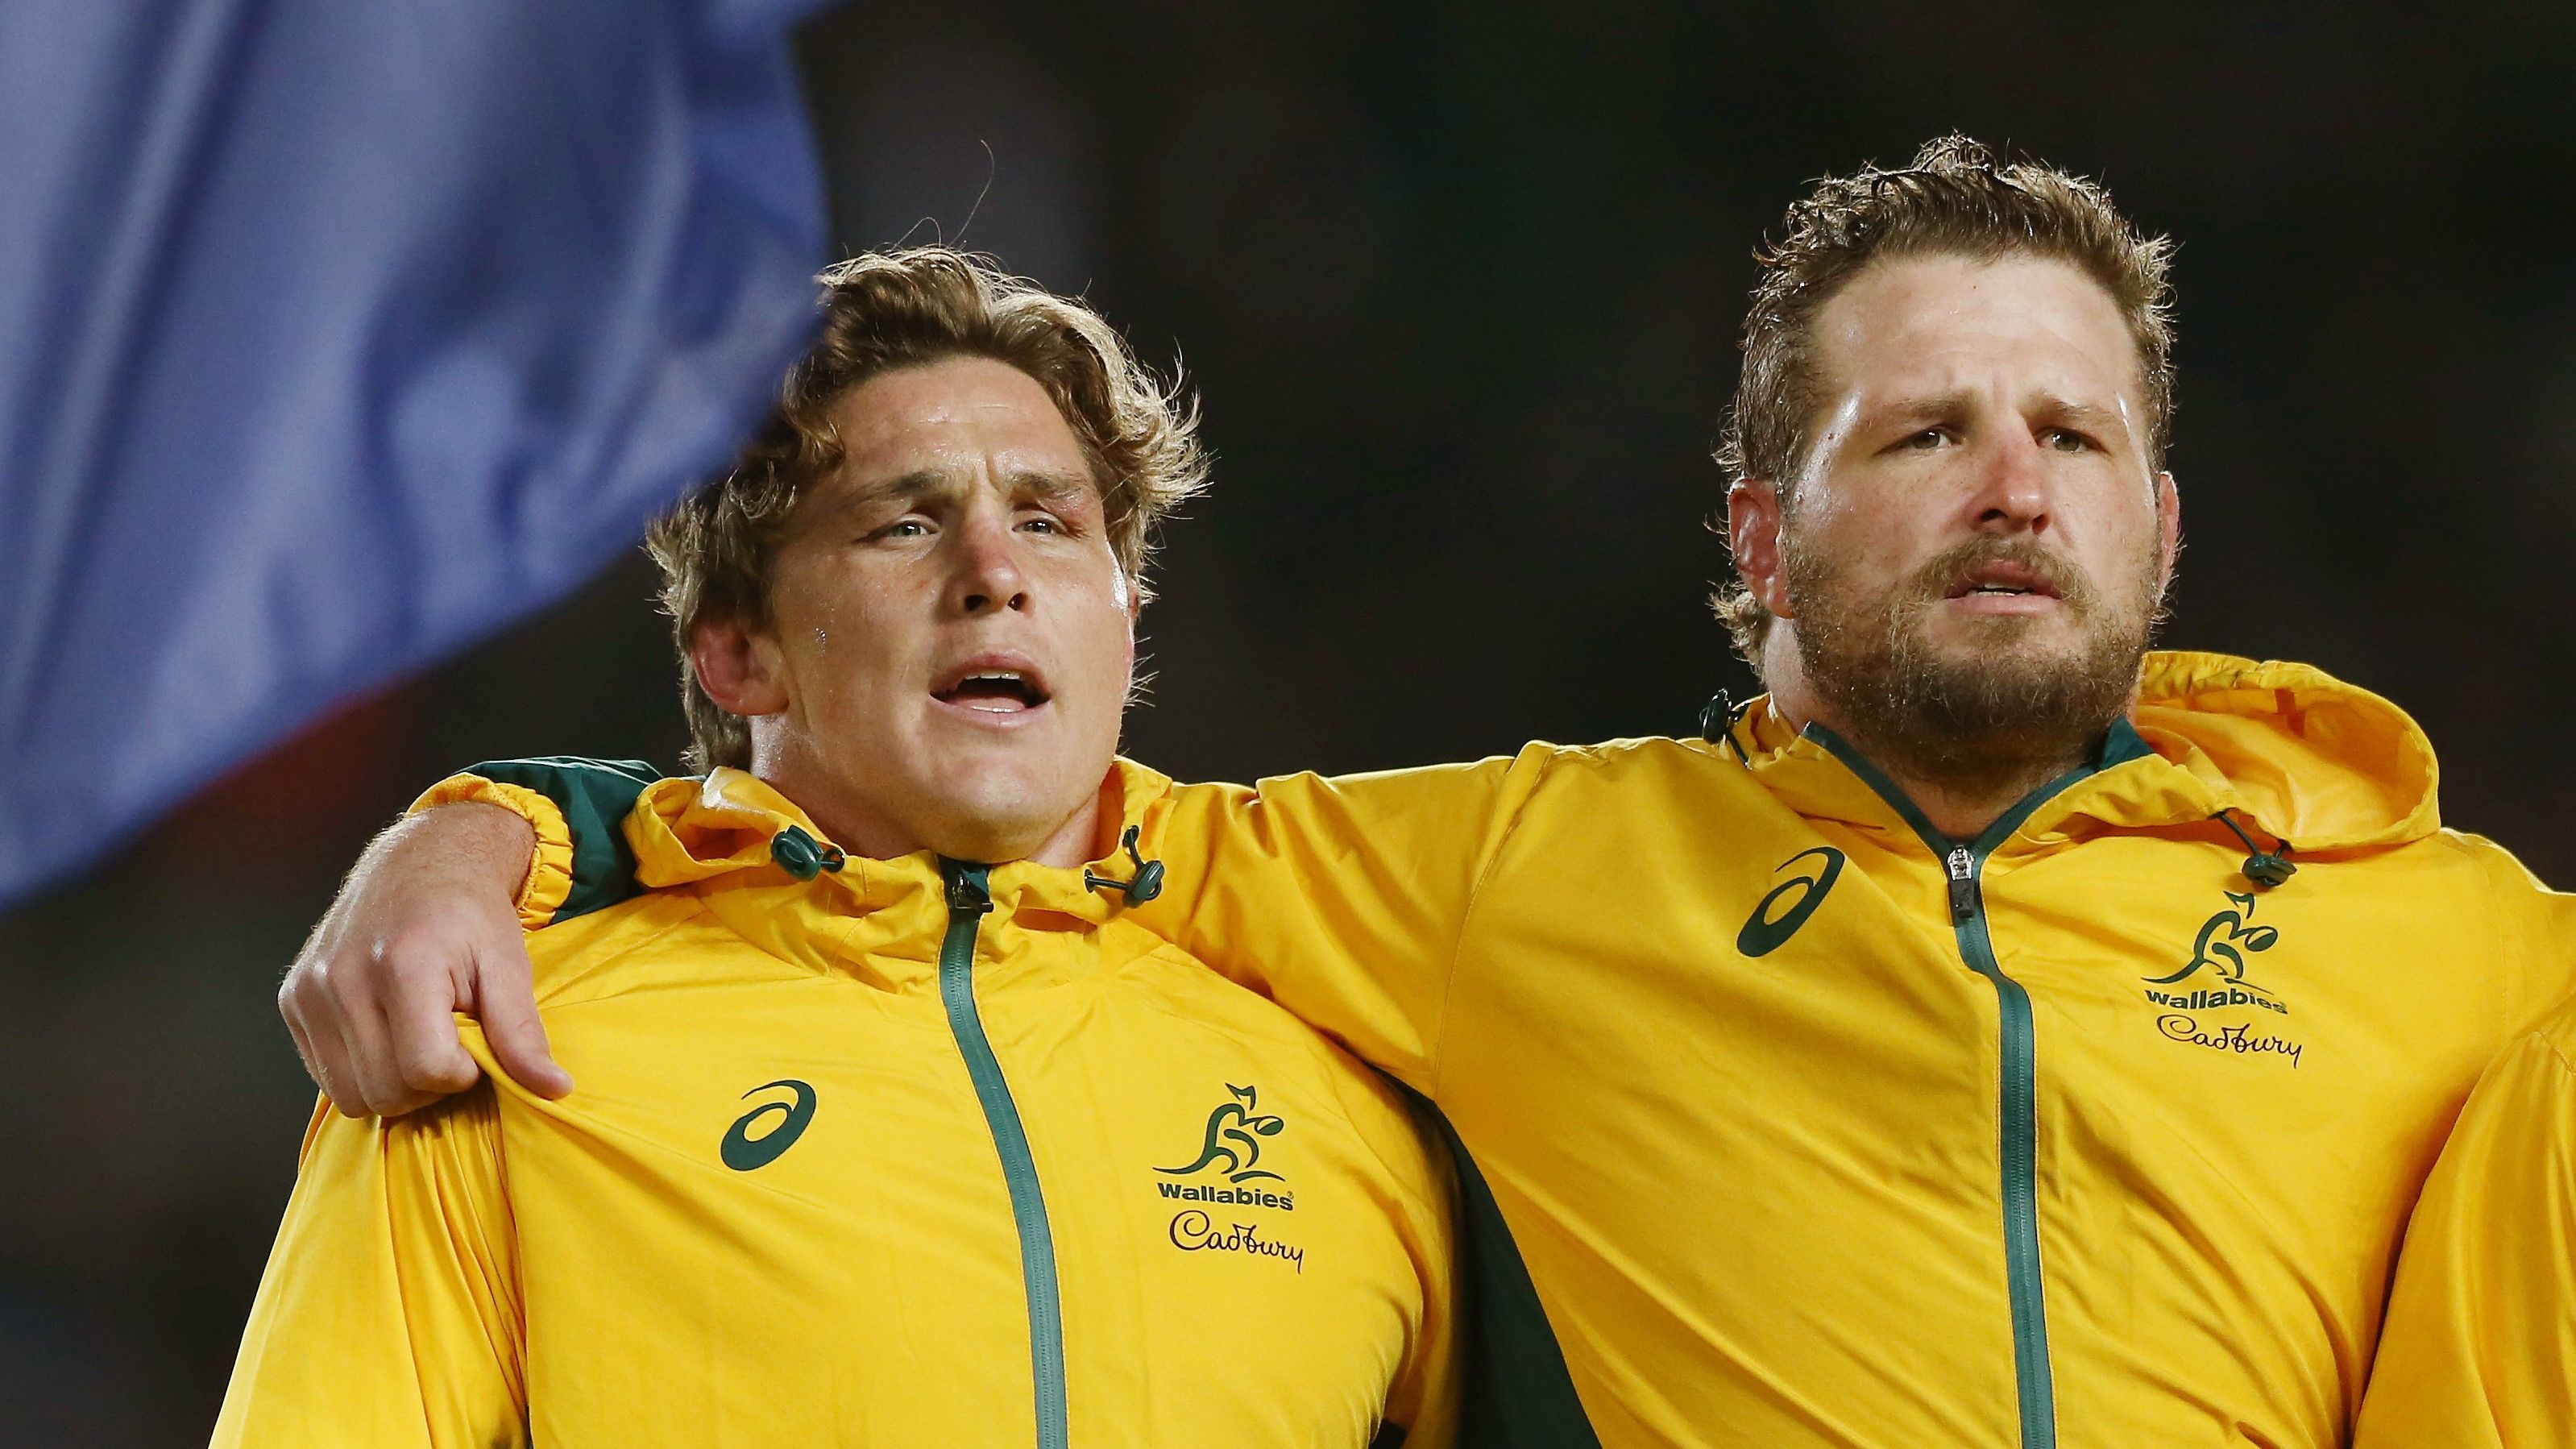 Michael Hooper (left) and James Slipper of the Wallabies sing the national anthem.